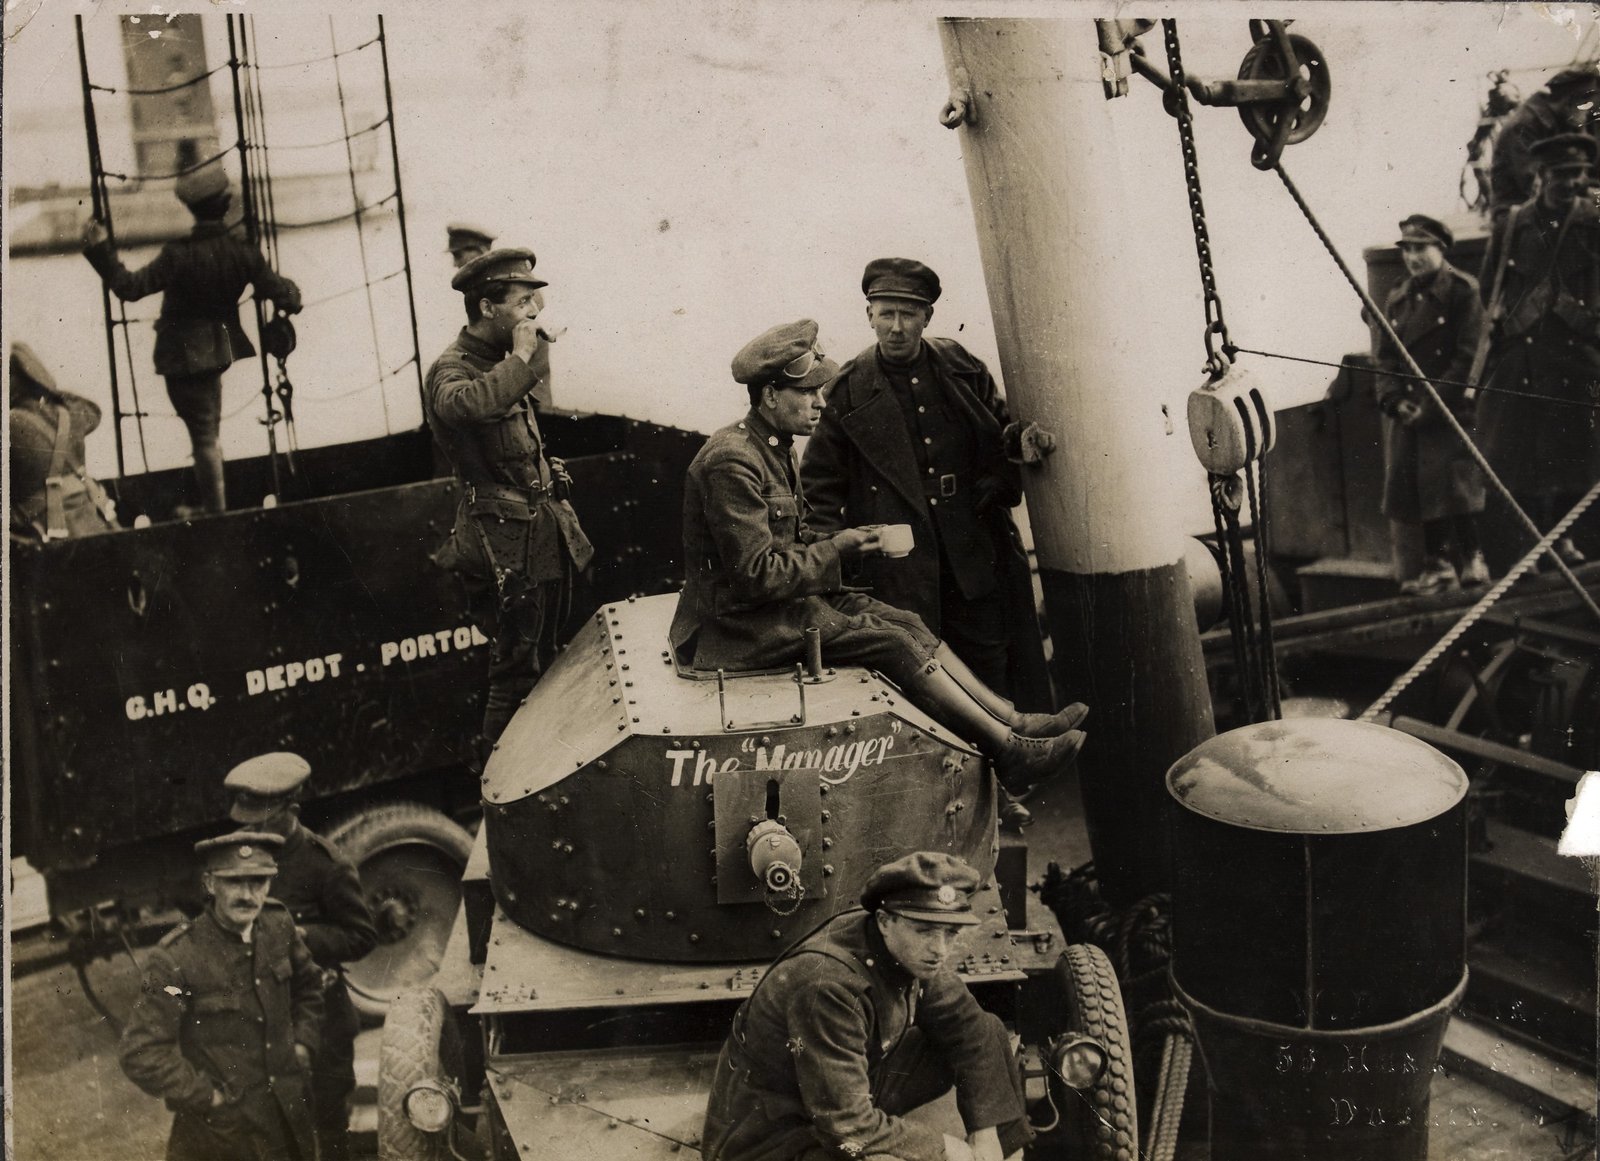 Image - Troops sitting on military vehicles on board the "Lady Wicklow", taking refreshments. Image courtesy of the National Library of Ireland